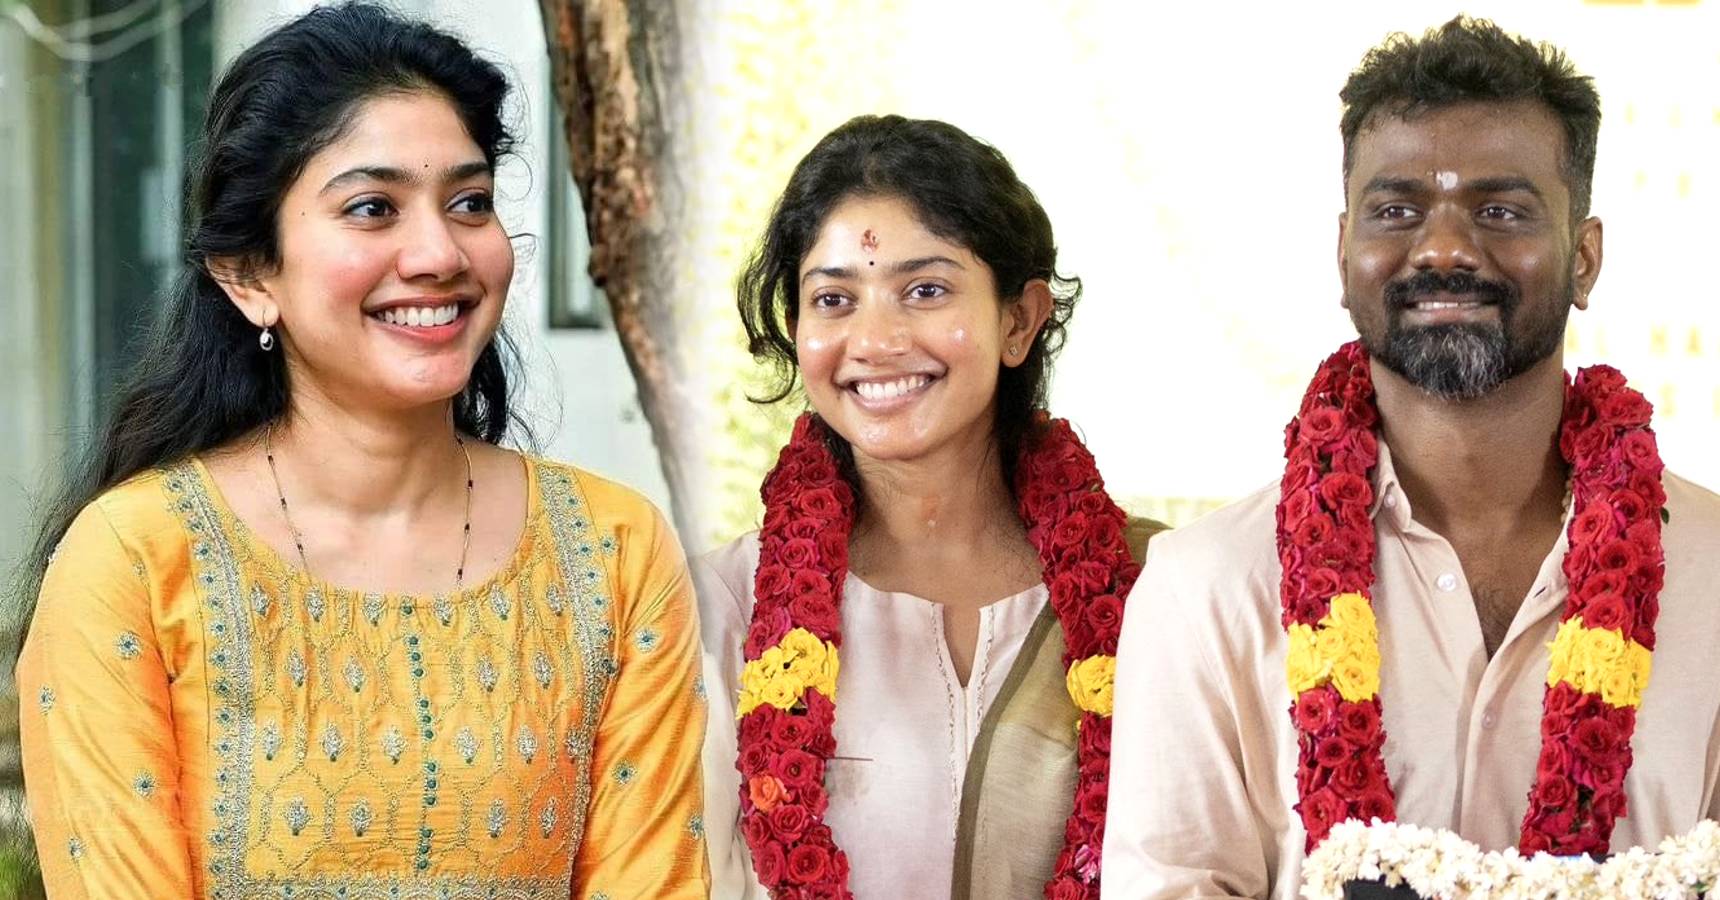 Sai Pallavi opened up about Viral Marriage Photos